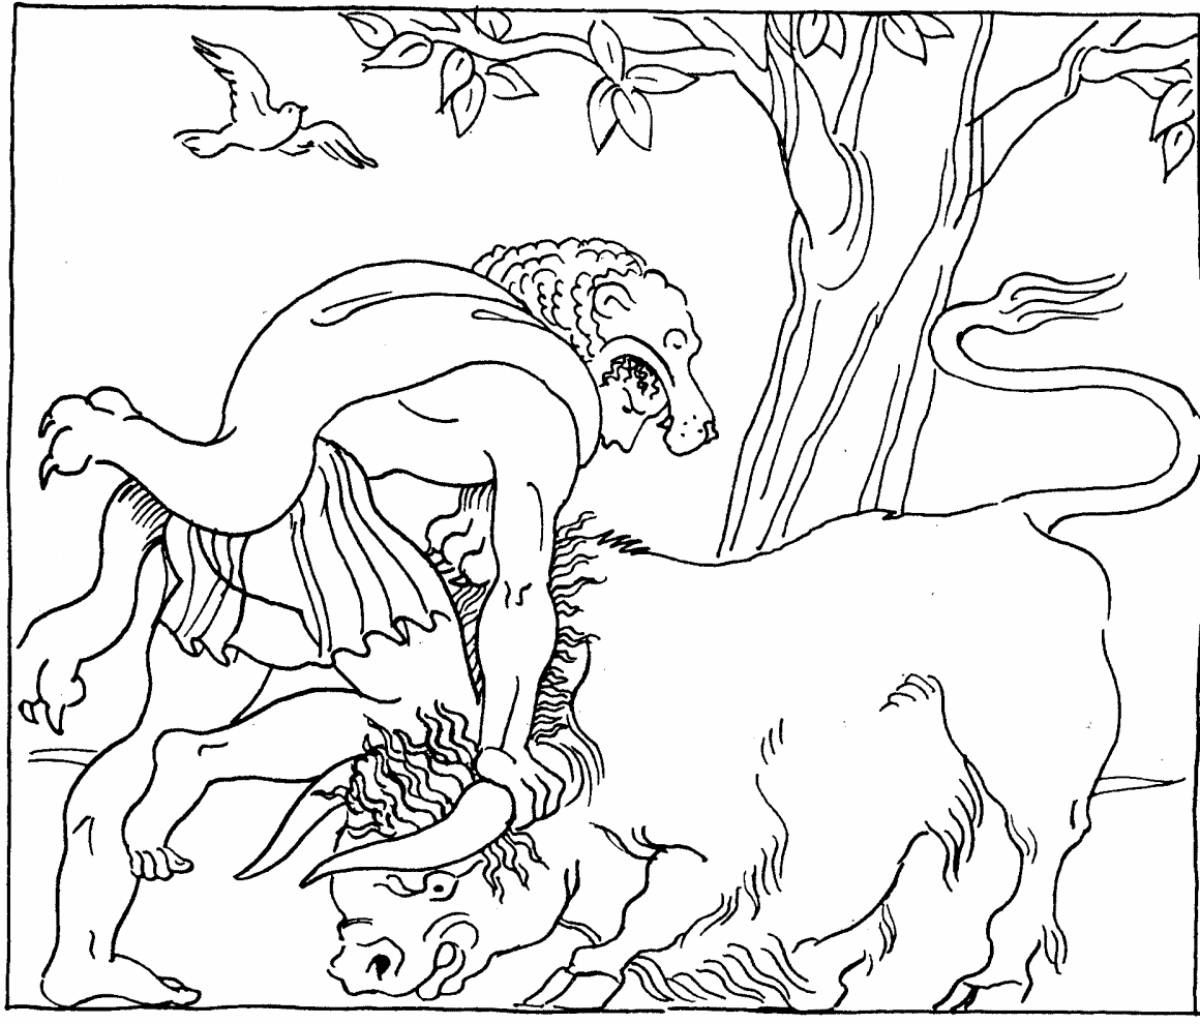 Brilliantly colored 12 labors of hercules coloring book